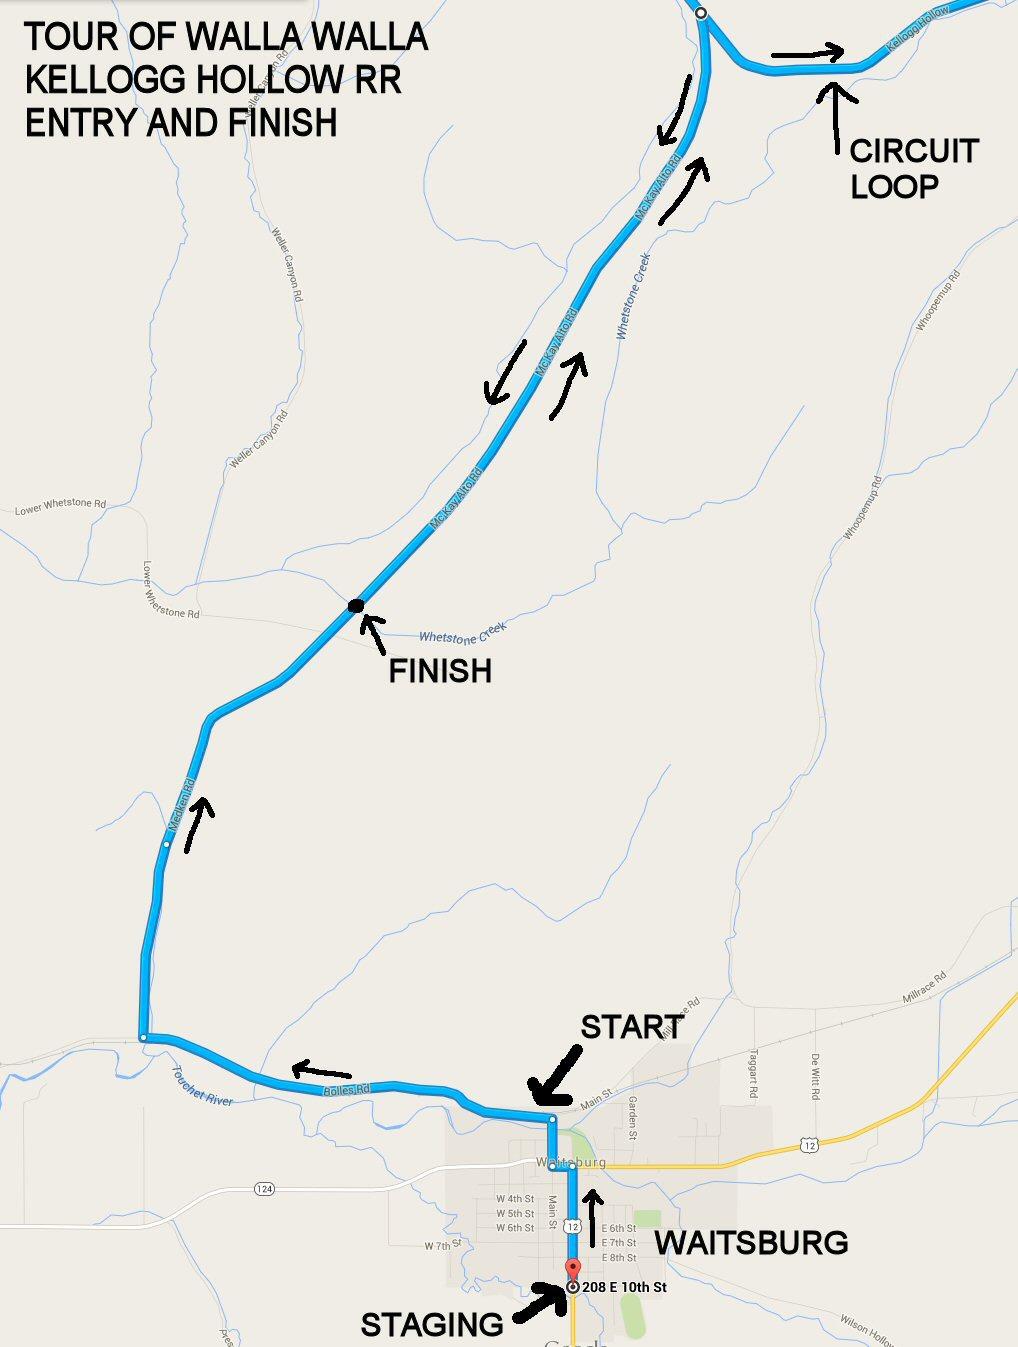 KELLOGG HOLLOW ROAD RACE ENTRY & FINISH 2015 Tour of